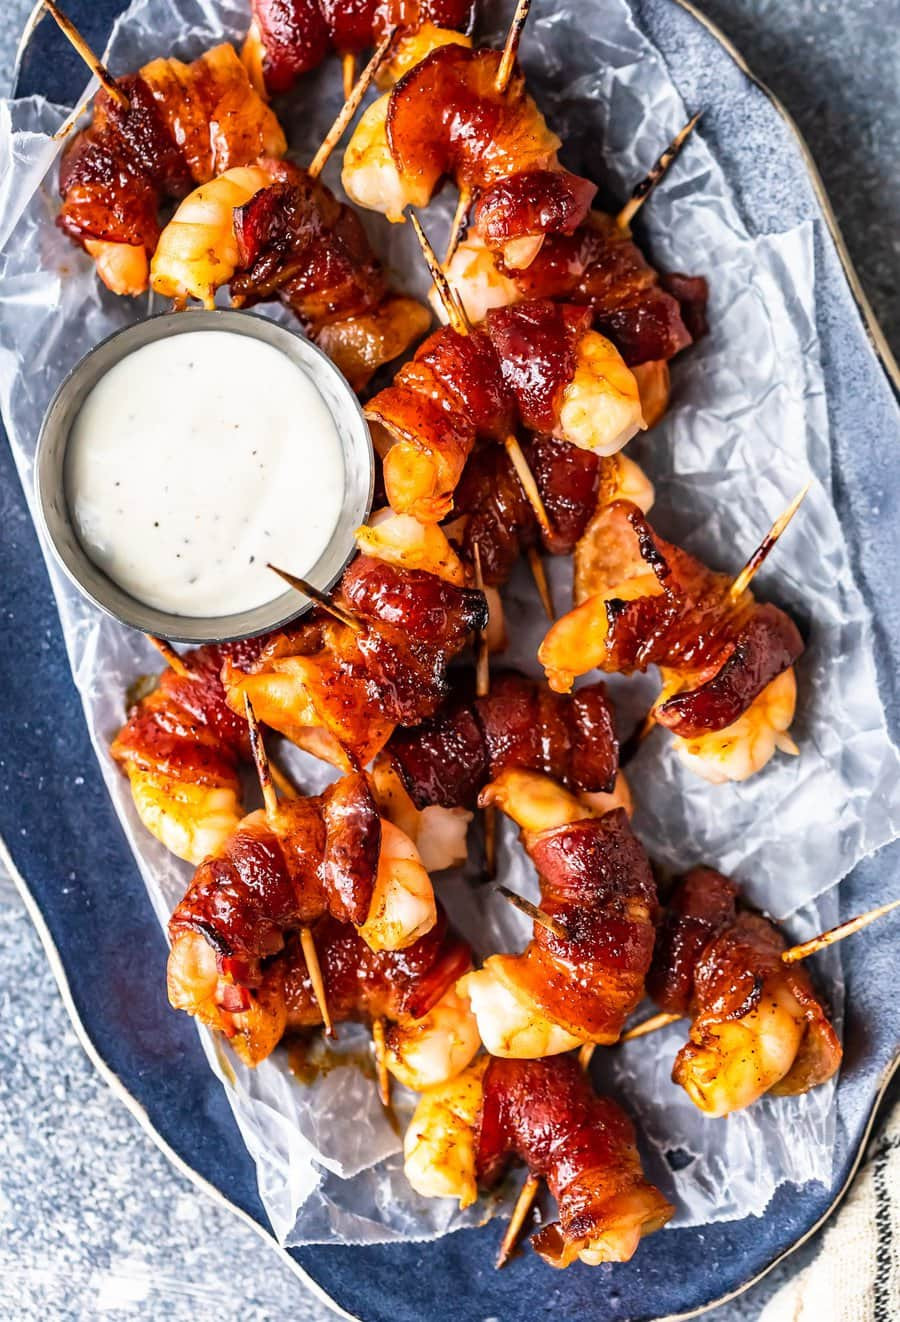 Bacon Wrapped Appetizers Recipe
 Easy Bacon Wrapped Shrimp Appetizer Recipe VIDEO